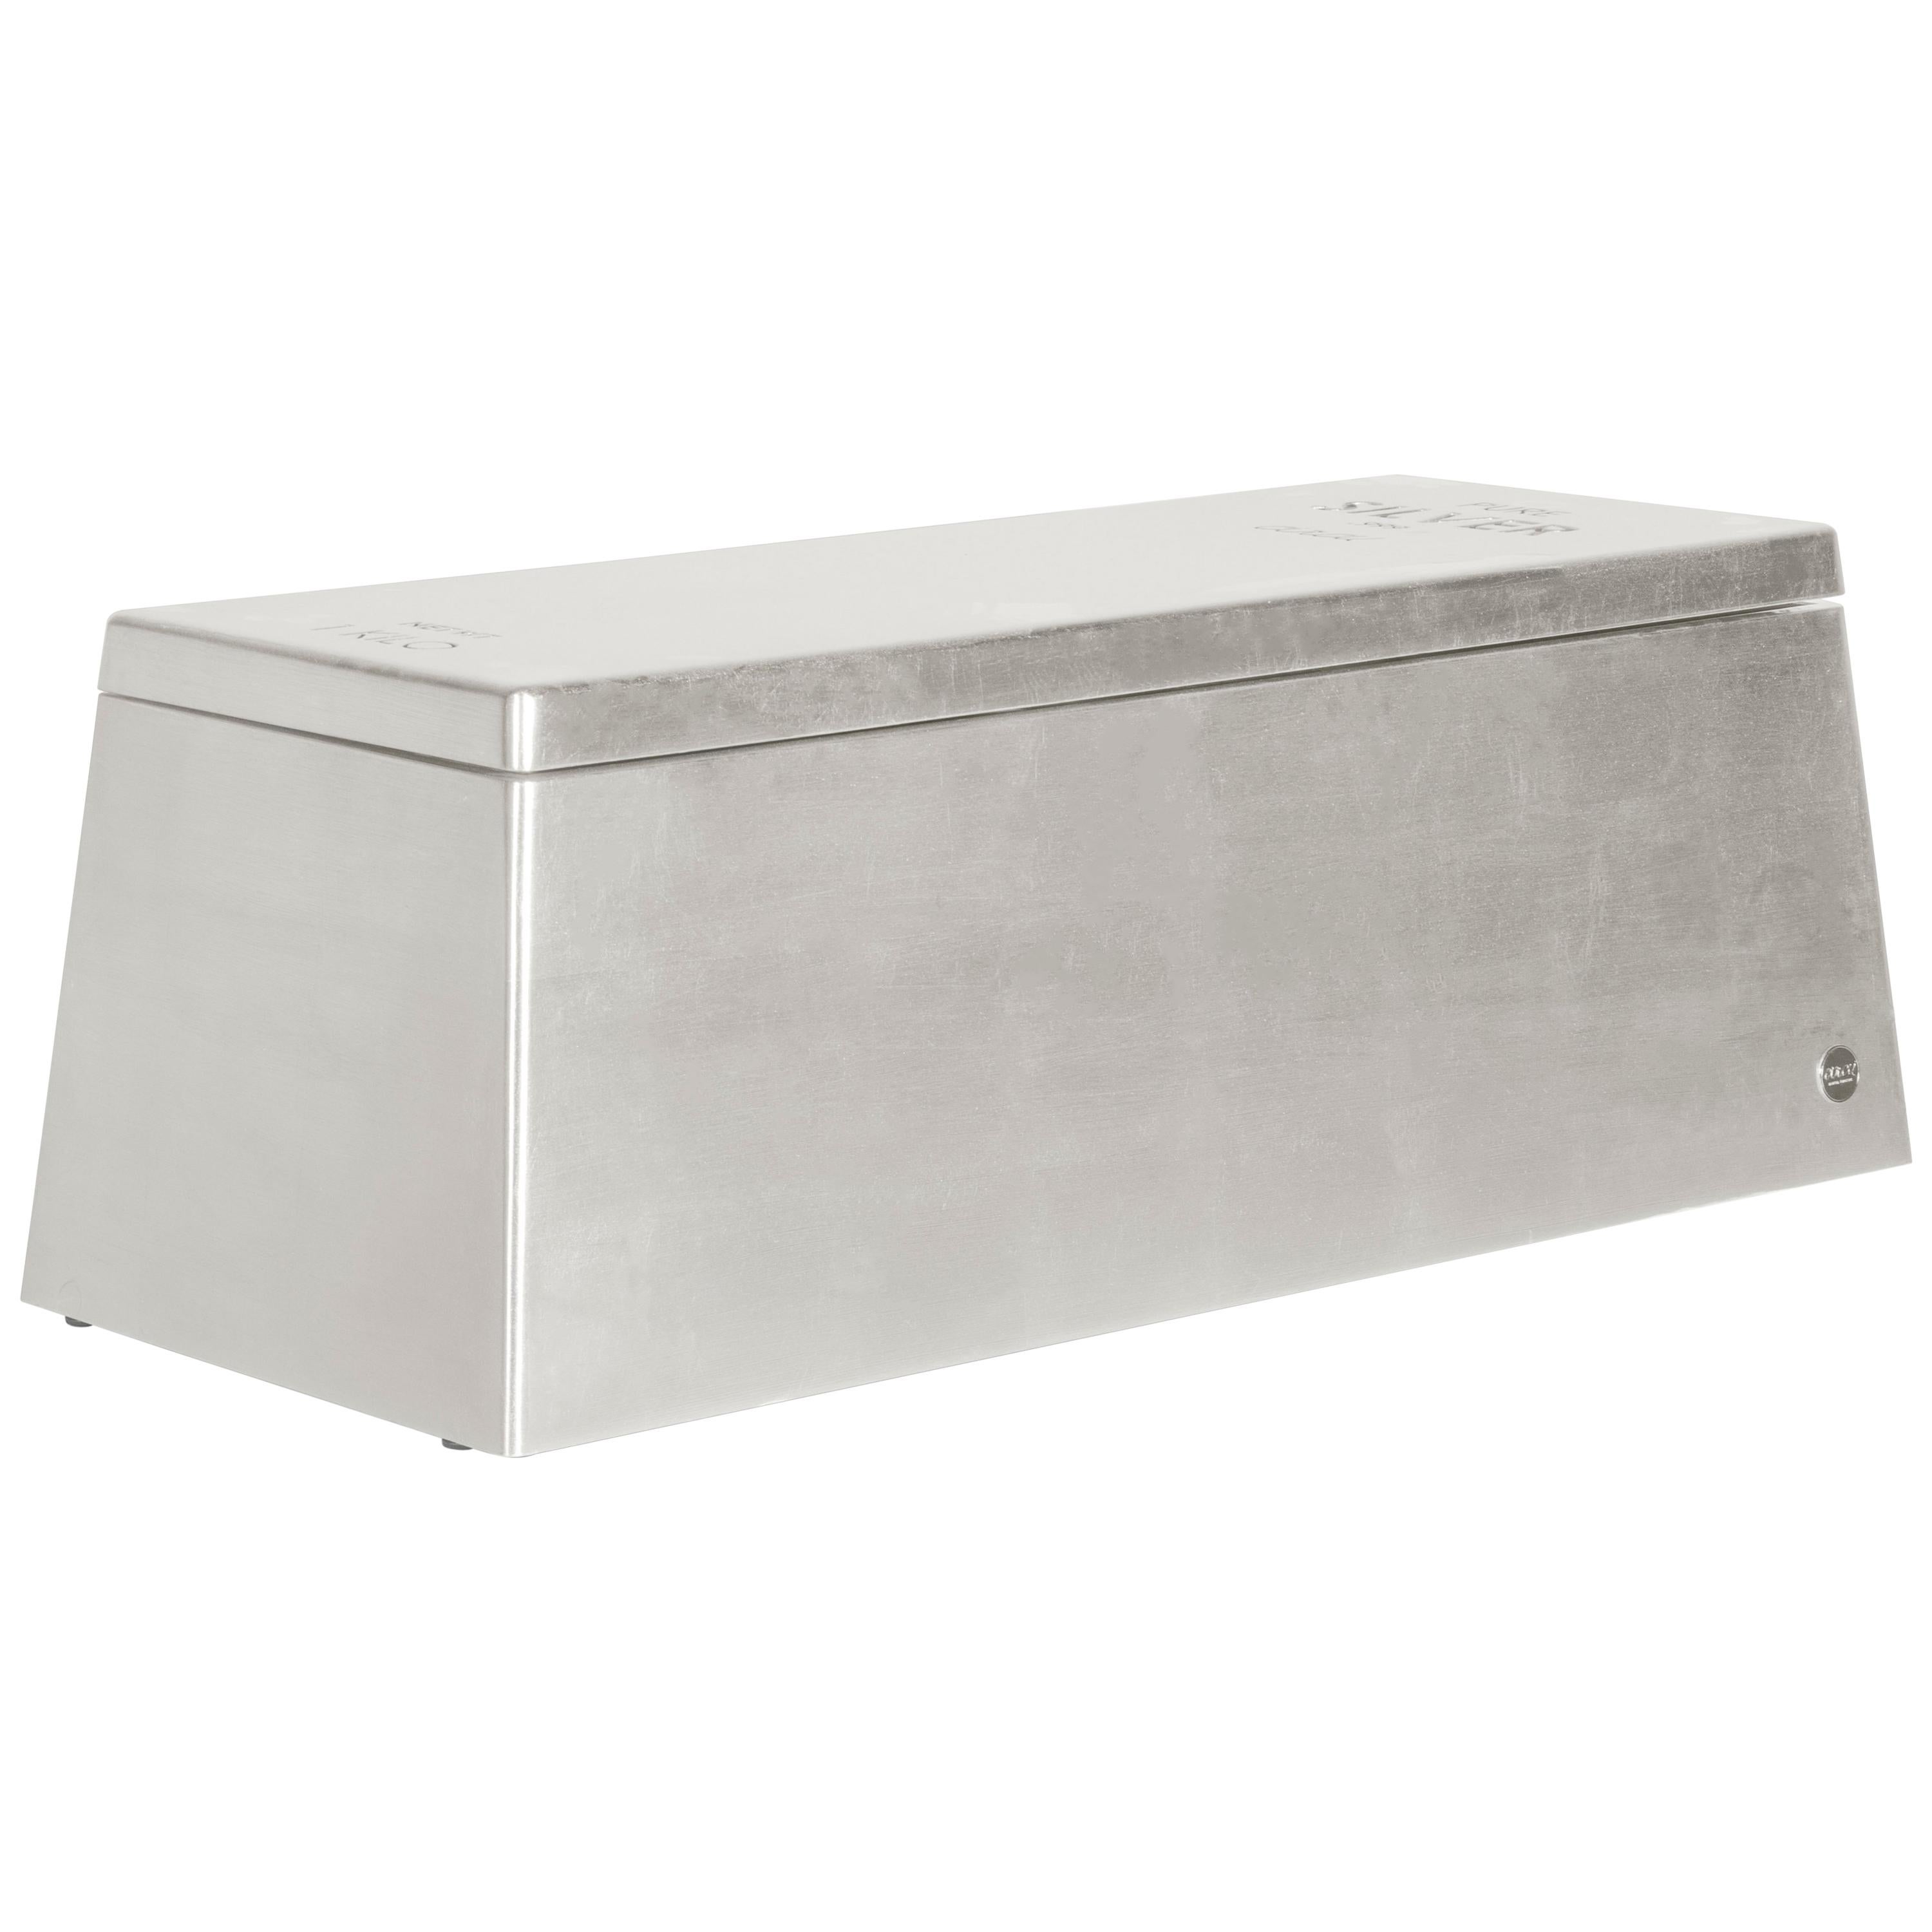 Silver Kids Toy Box in Wood with Silver Finish by Circu Magical Furniture

Silver Kids Toy Box in Wood with Silver Finish by Circu Magical Furniture its a kids’ toy box inspired by the Fine silver bar shape. This toy box is a useful storage solution